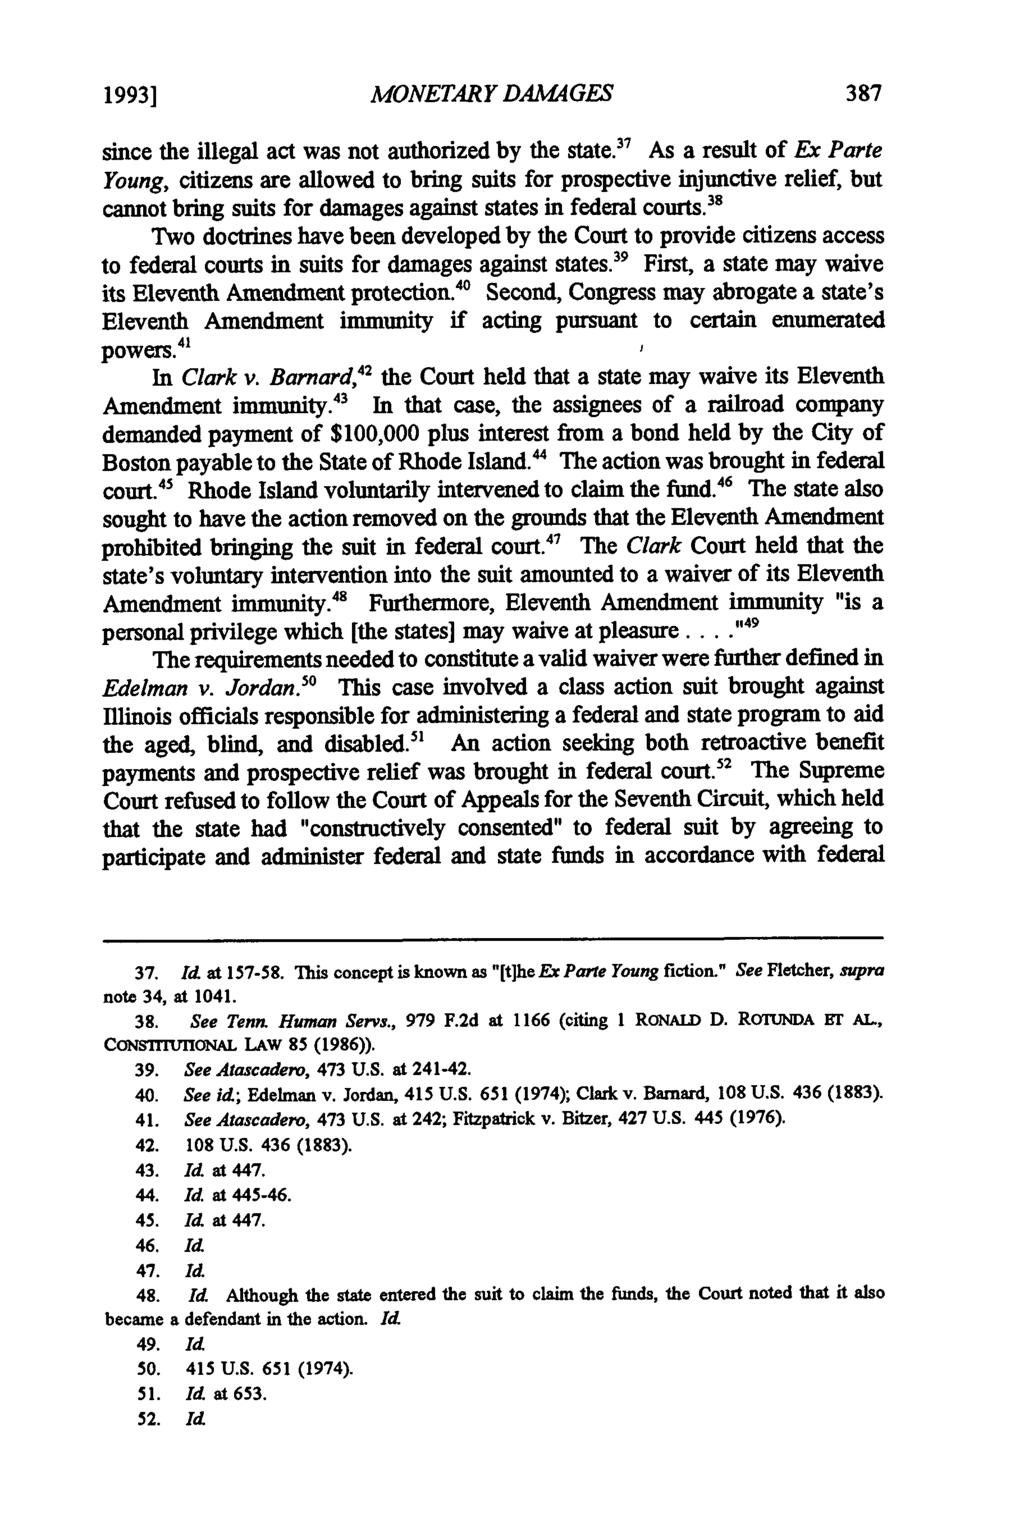 1993] Reid: Reid: Monetary Damages against States MONETARY DAMAGES since the illegal act was not authorized by the state.